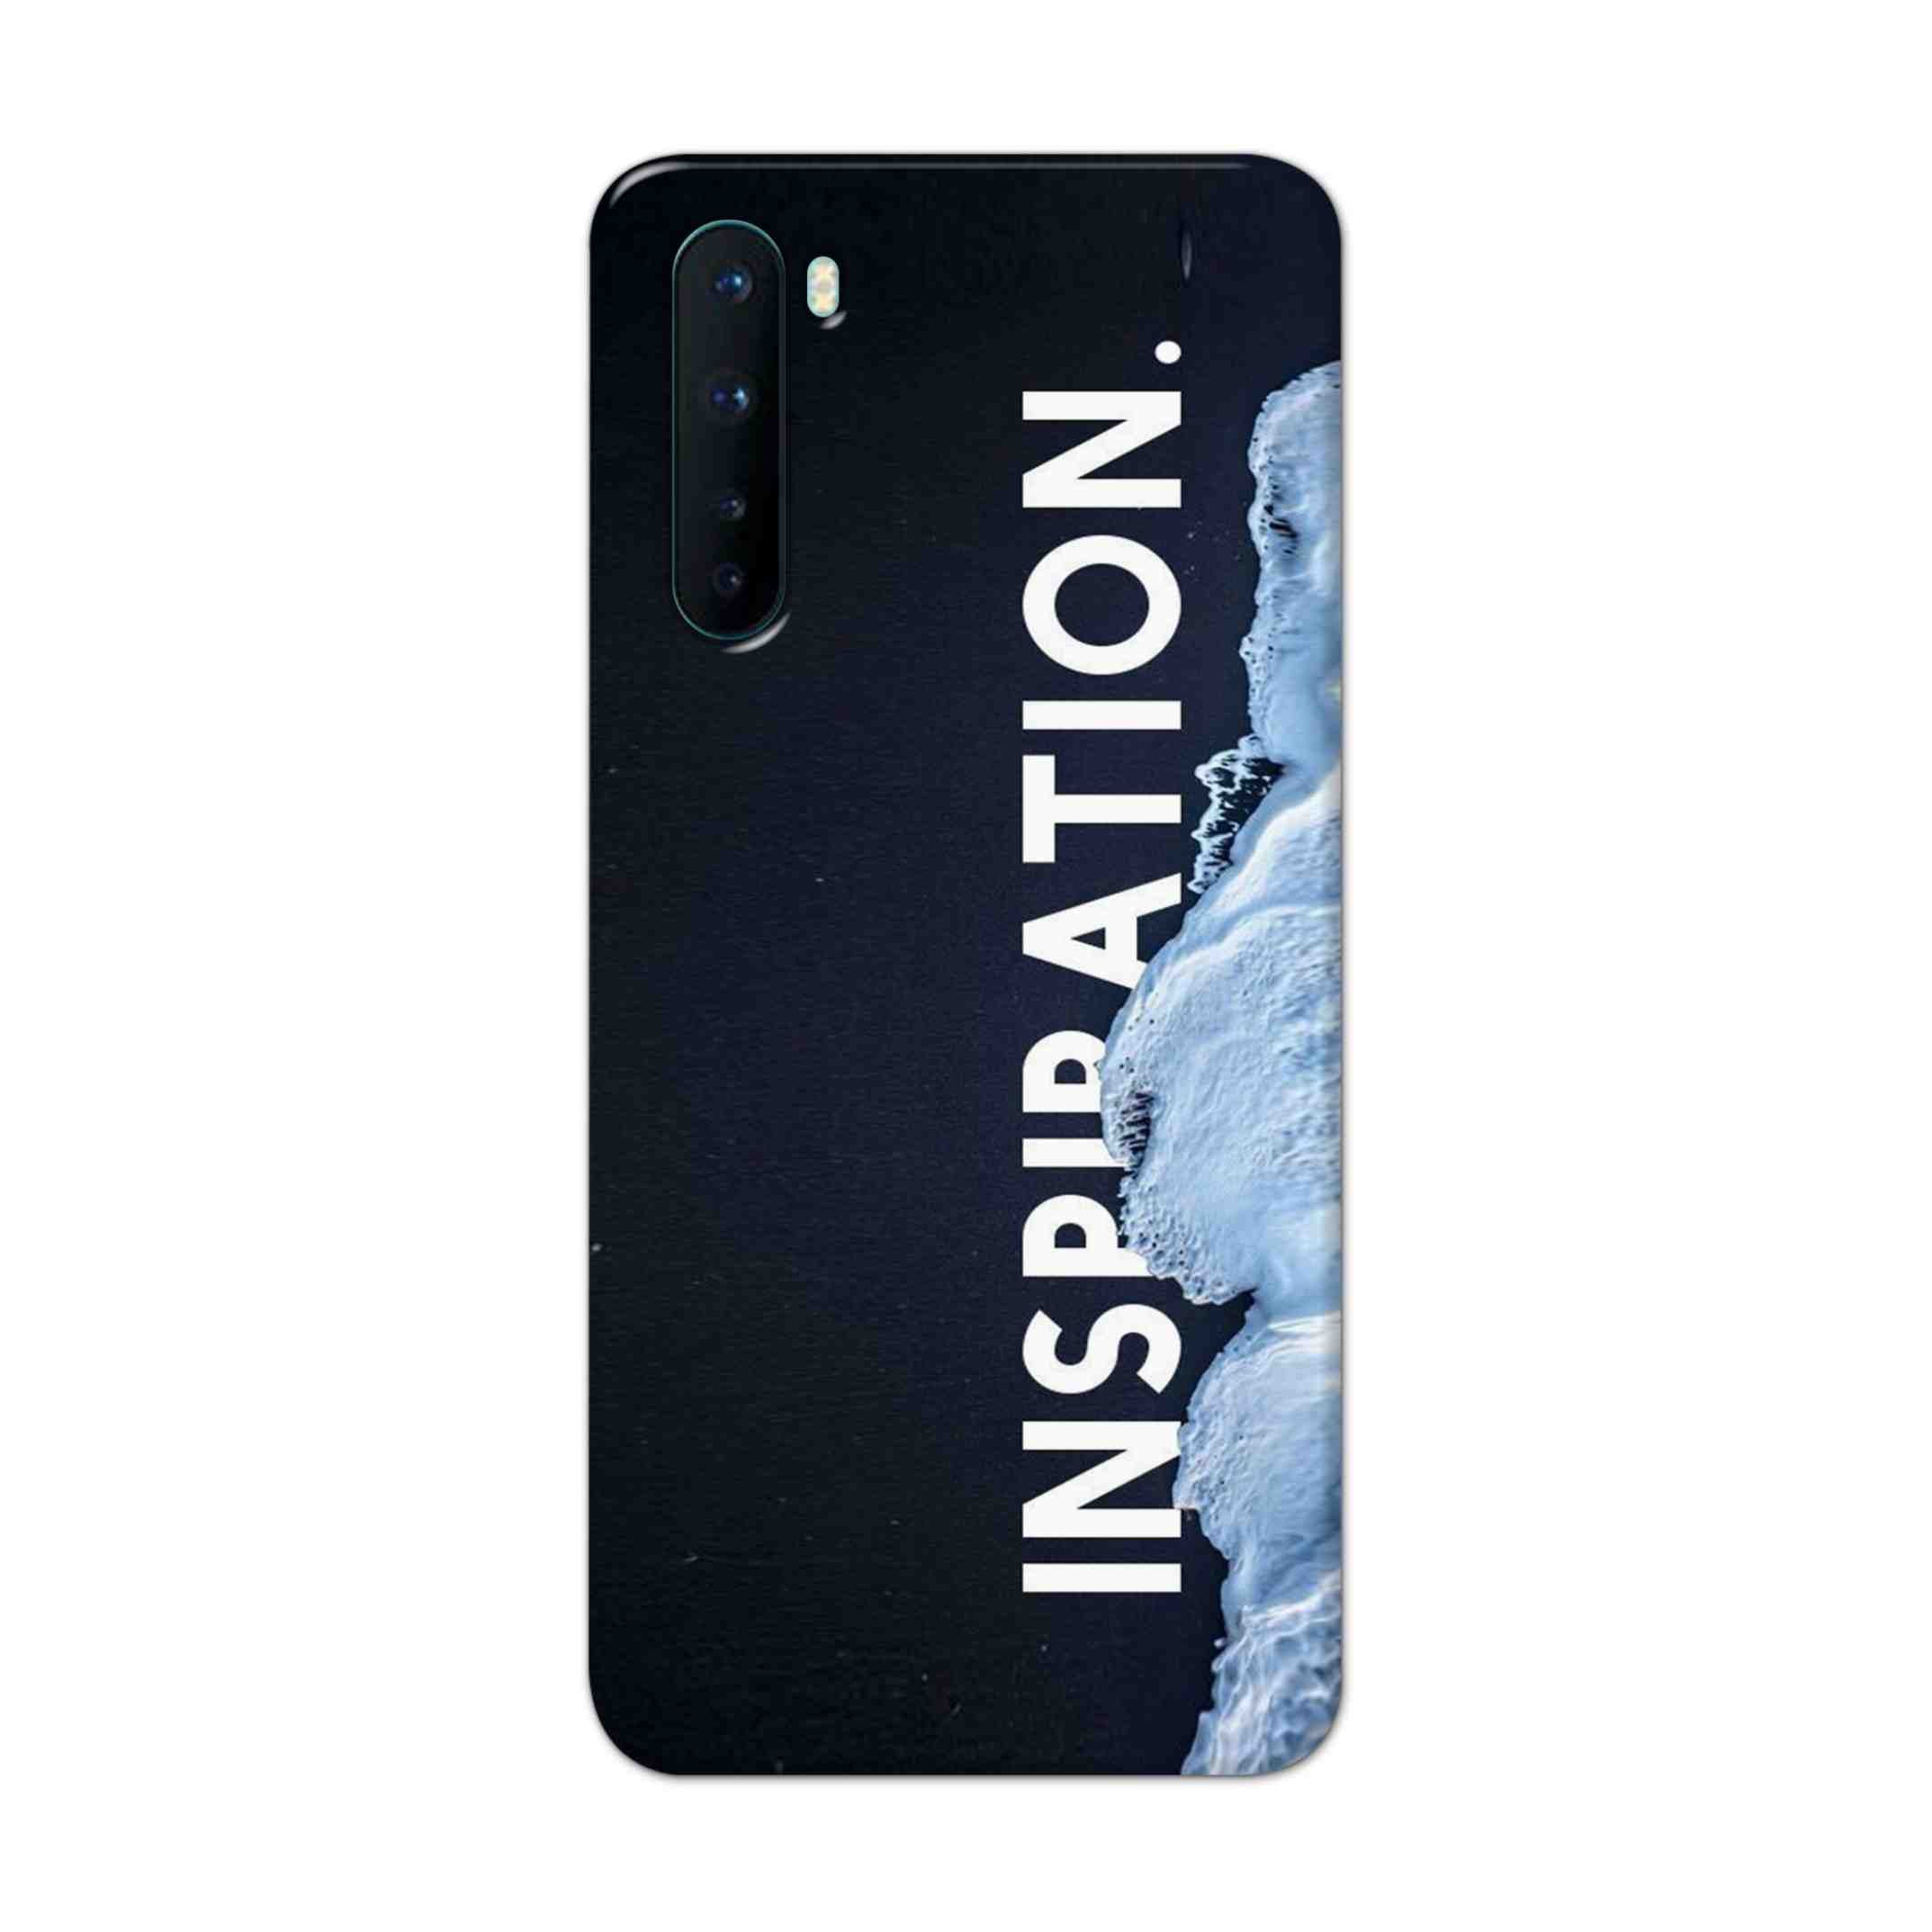 Buy Inspiration Hard Back Mobile Phone Case Cover For OnePlus Nord Online